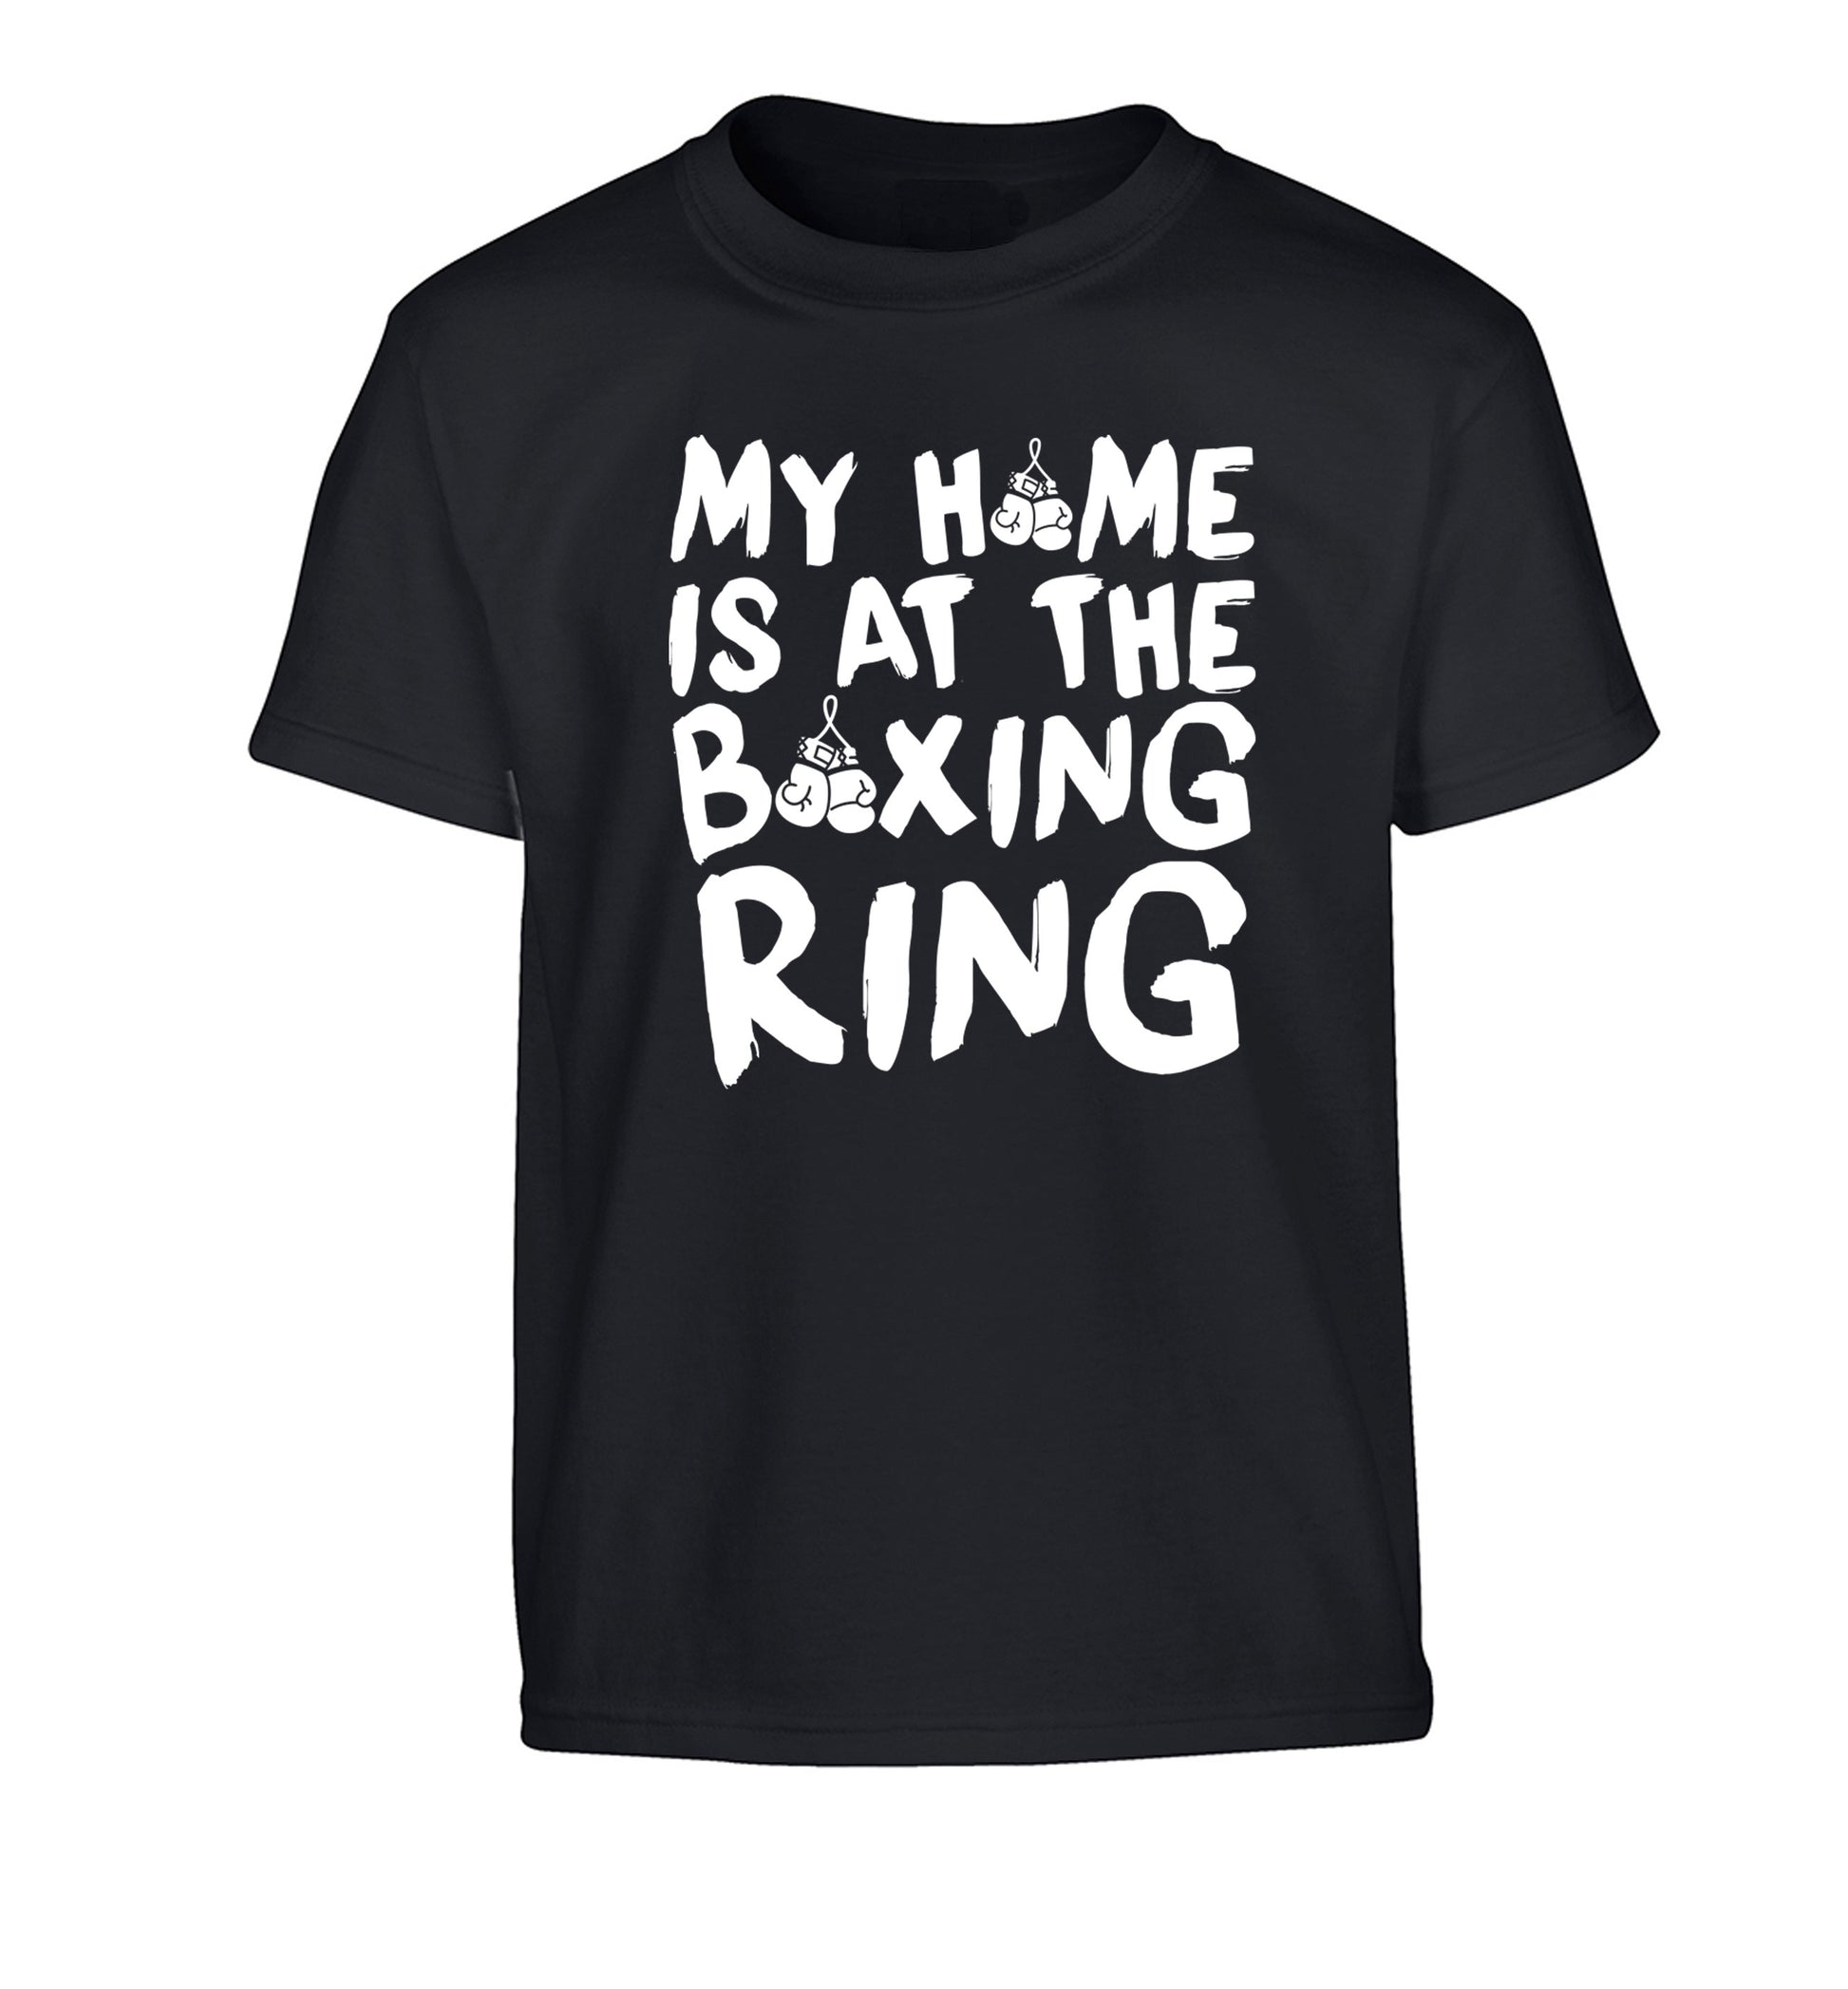 My home is at the boxing ring Children's black Tshirt 12-14 Years